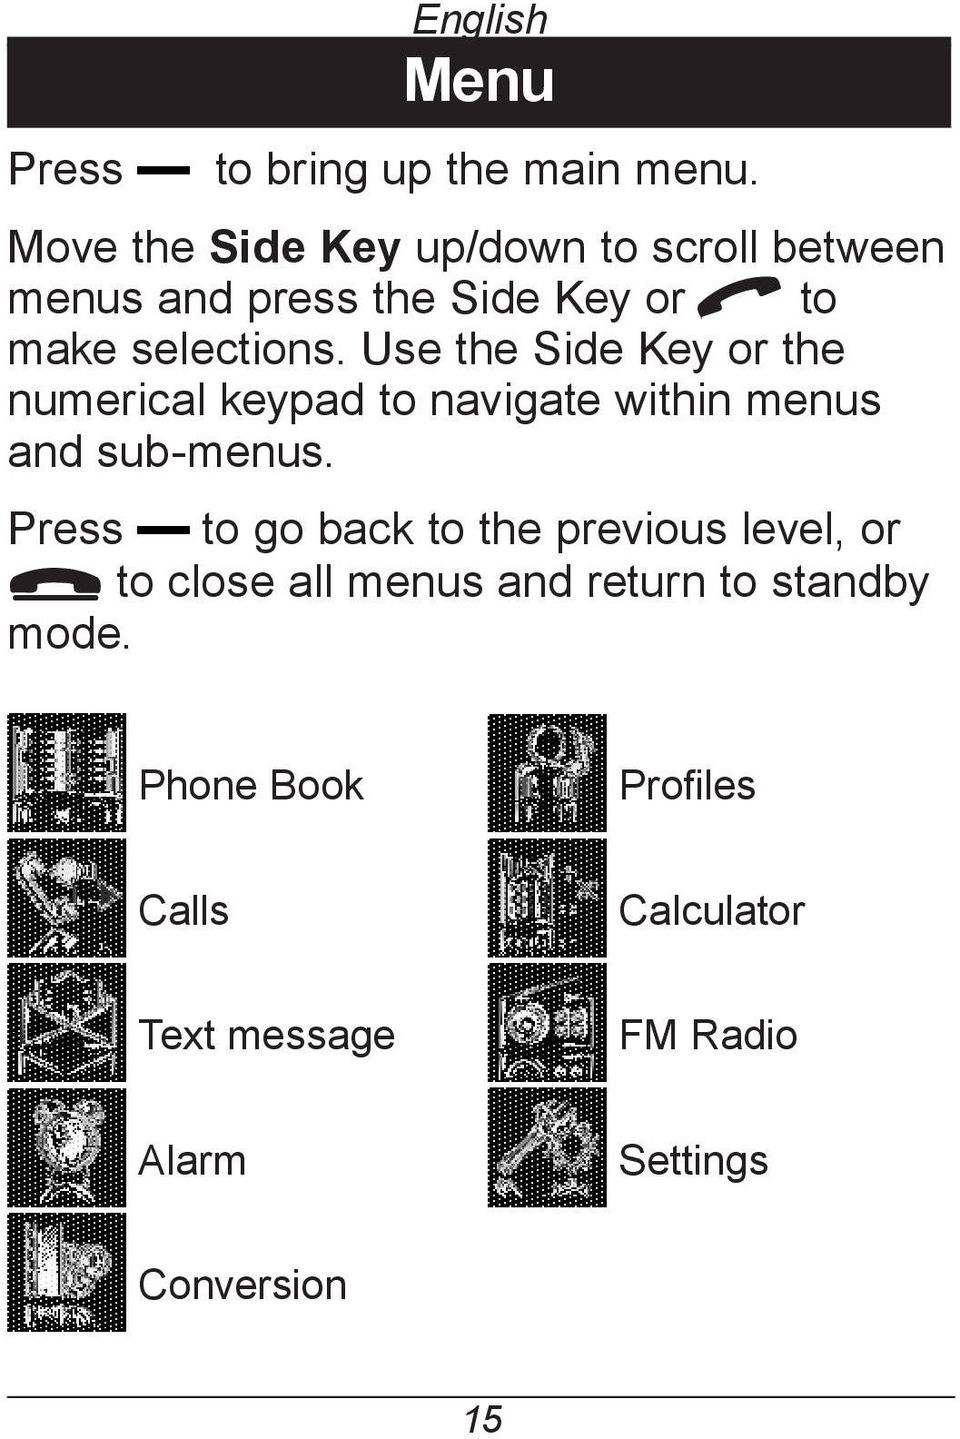 Use the Side Key or the numerical keypad to navigate within menus and sub-menus.